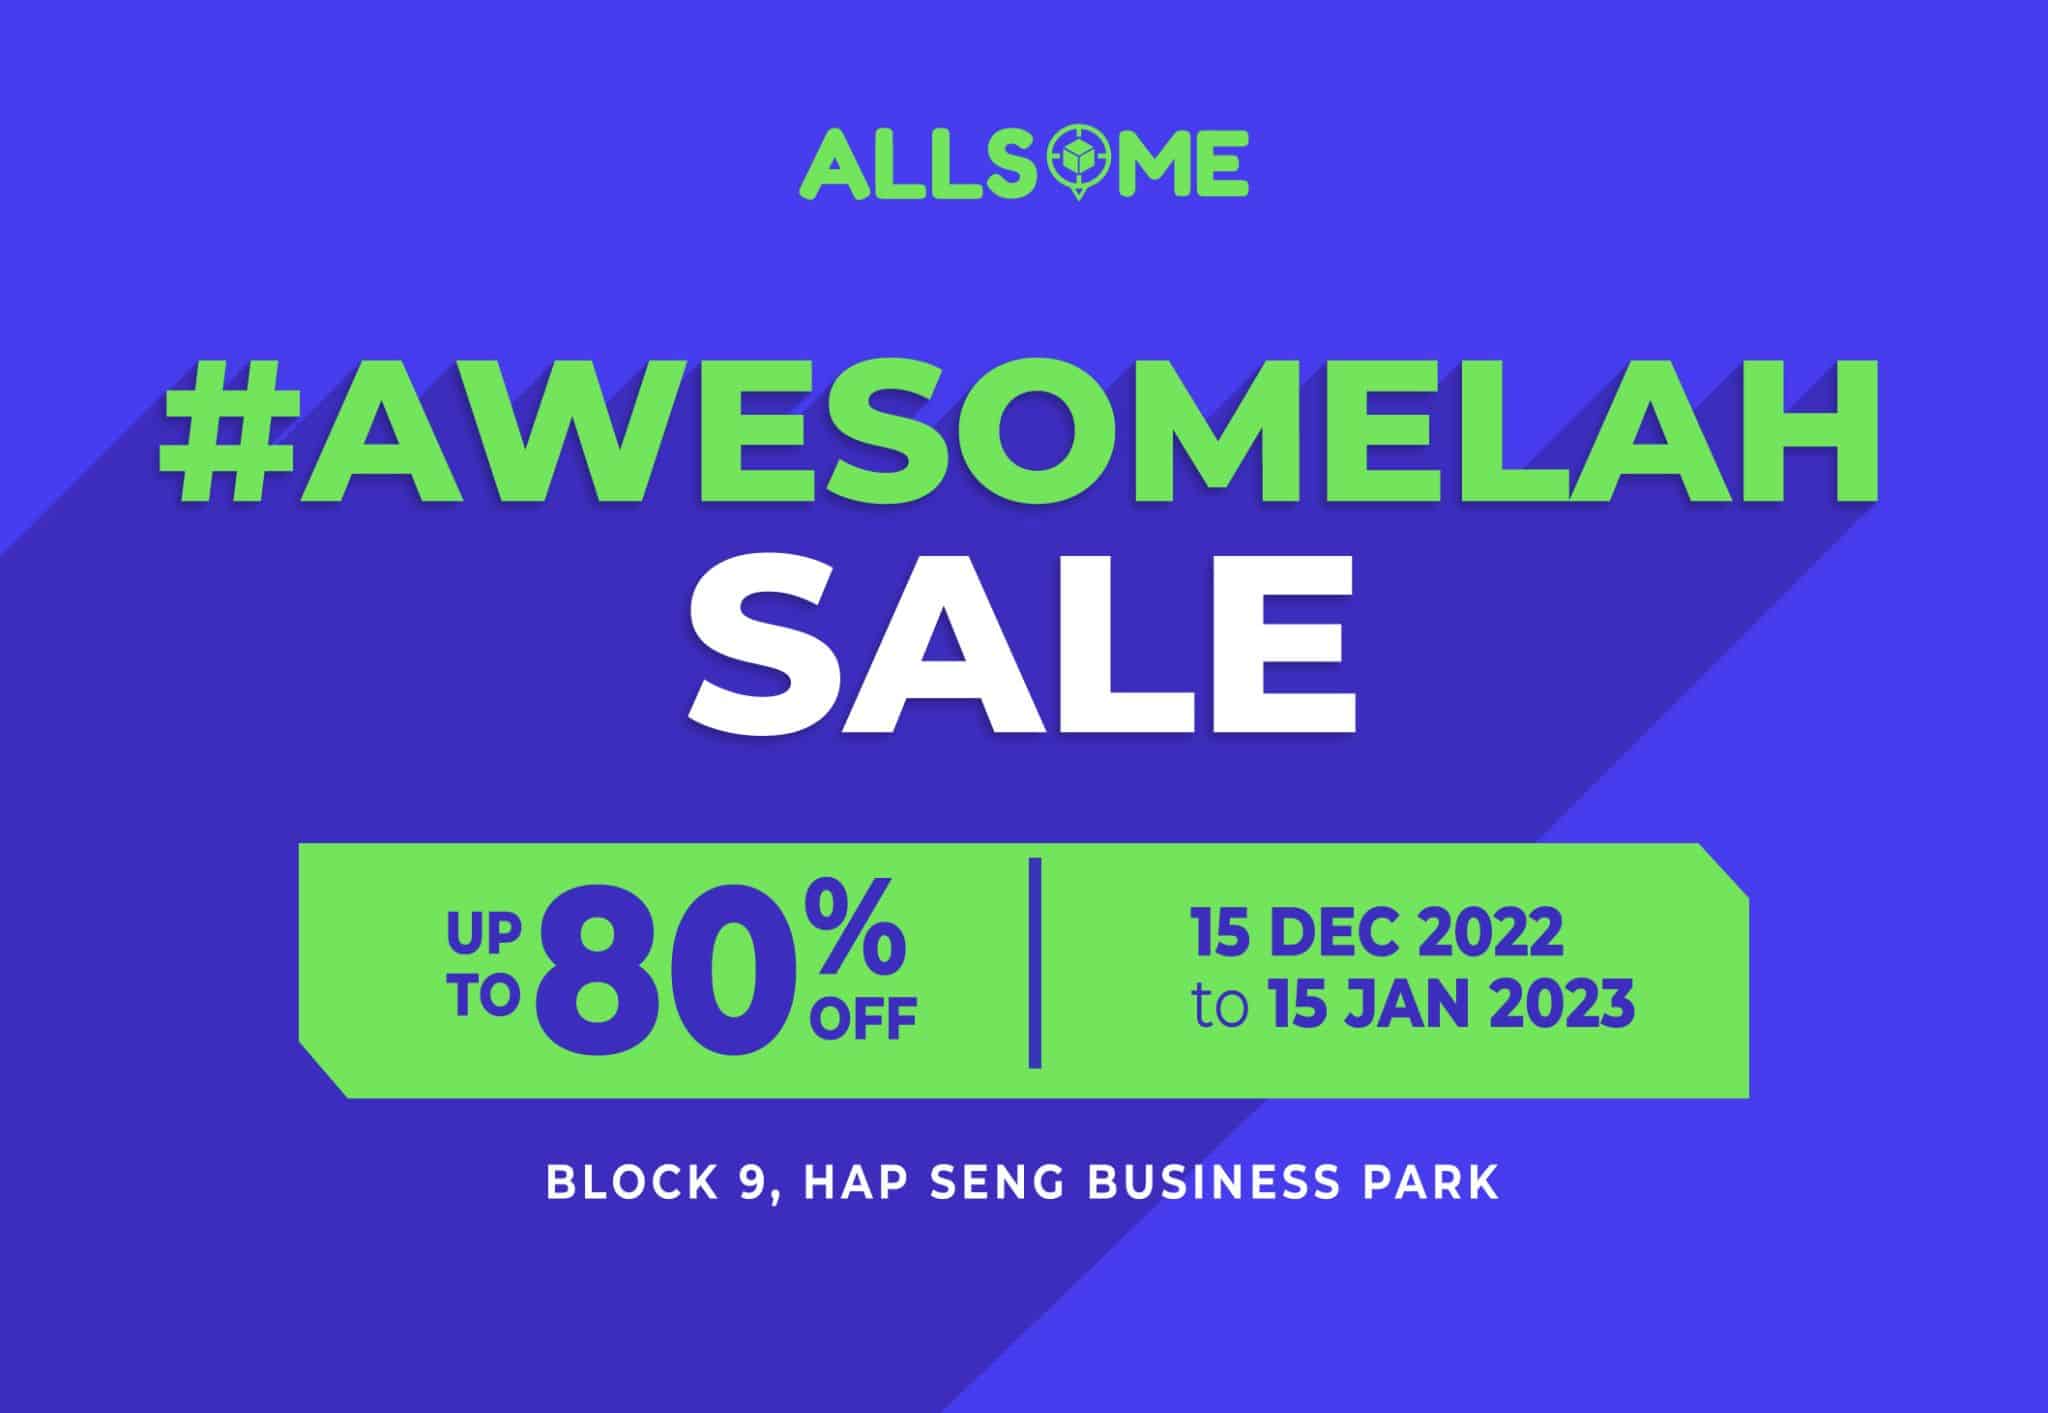 Get All You Need (And Then Some More!) with the AwesomeLah Nationwide Sales Event This Holiday Season